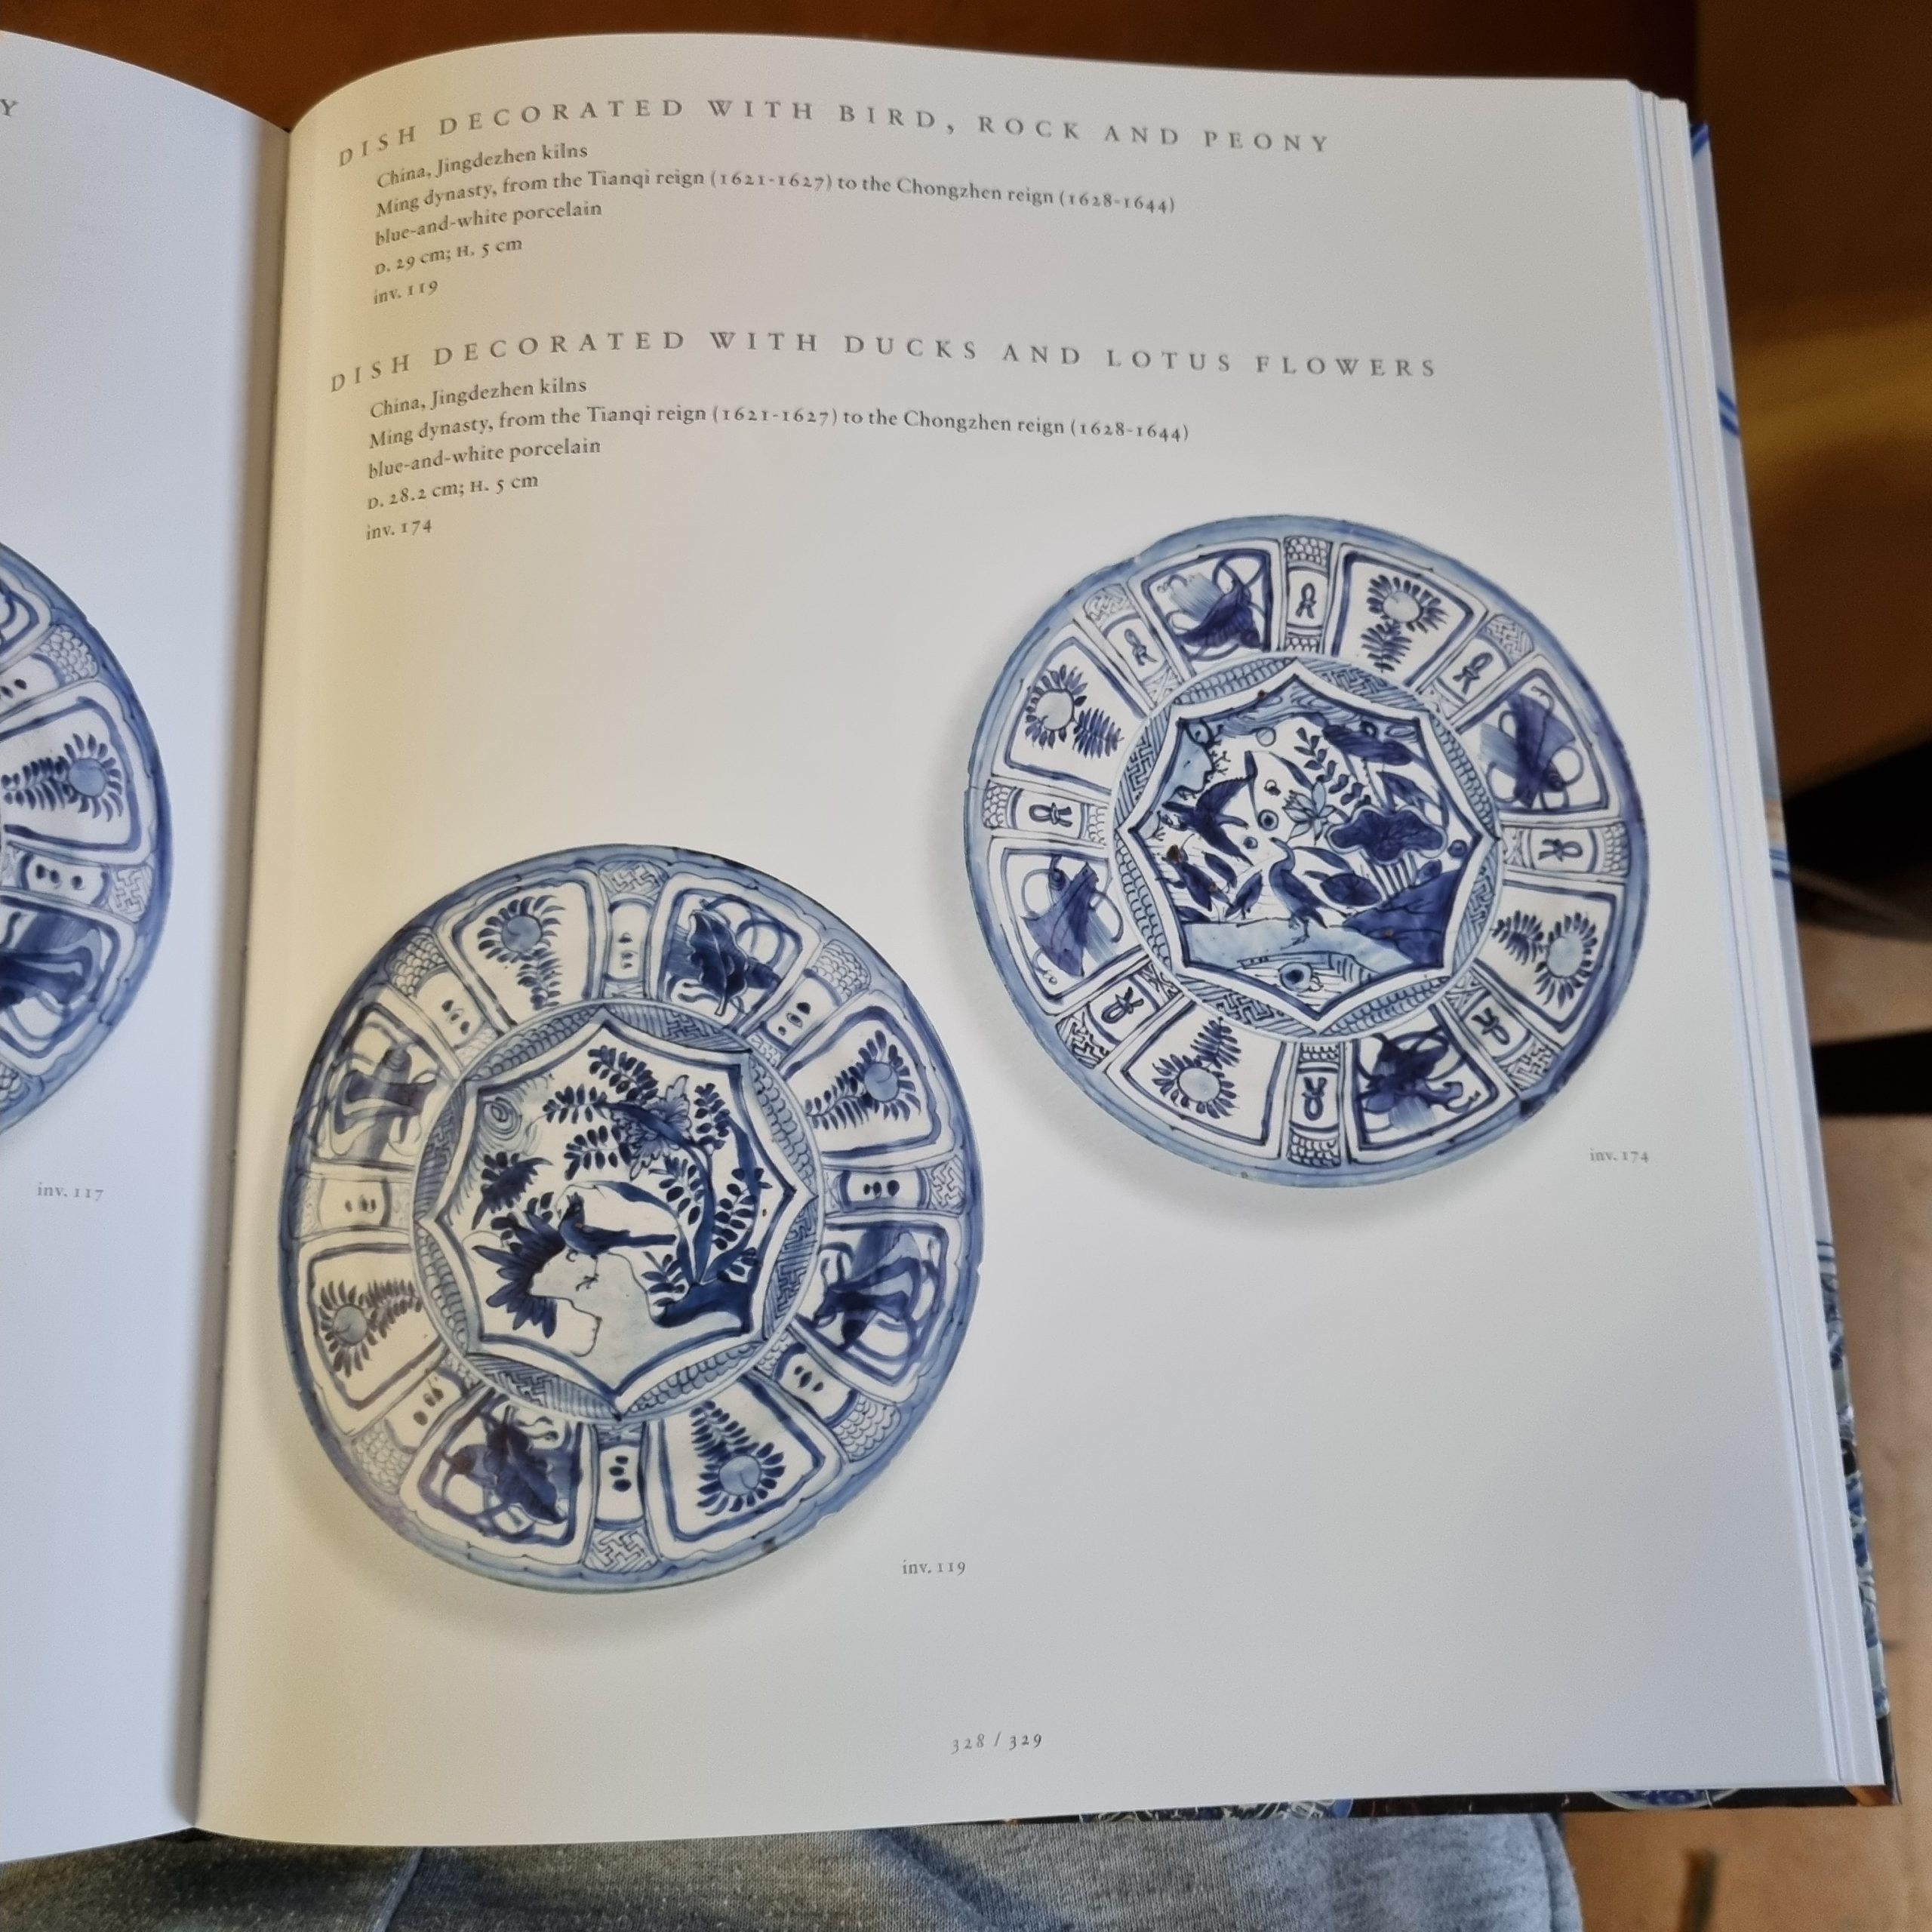 Large late Ming dynasty Wanli period blue and white kraak ware export porcelain deep charger. Decorated in the centre within an eight-pointed medallion with a Qilin/Foo dog with Temple Ball. The central design is encircled by a eight panel border on